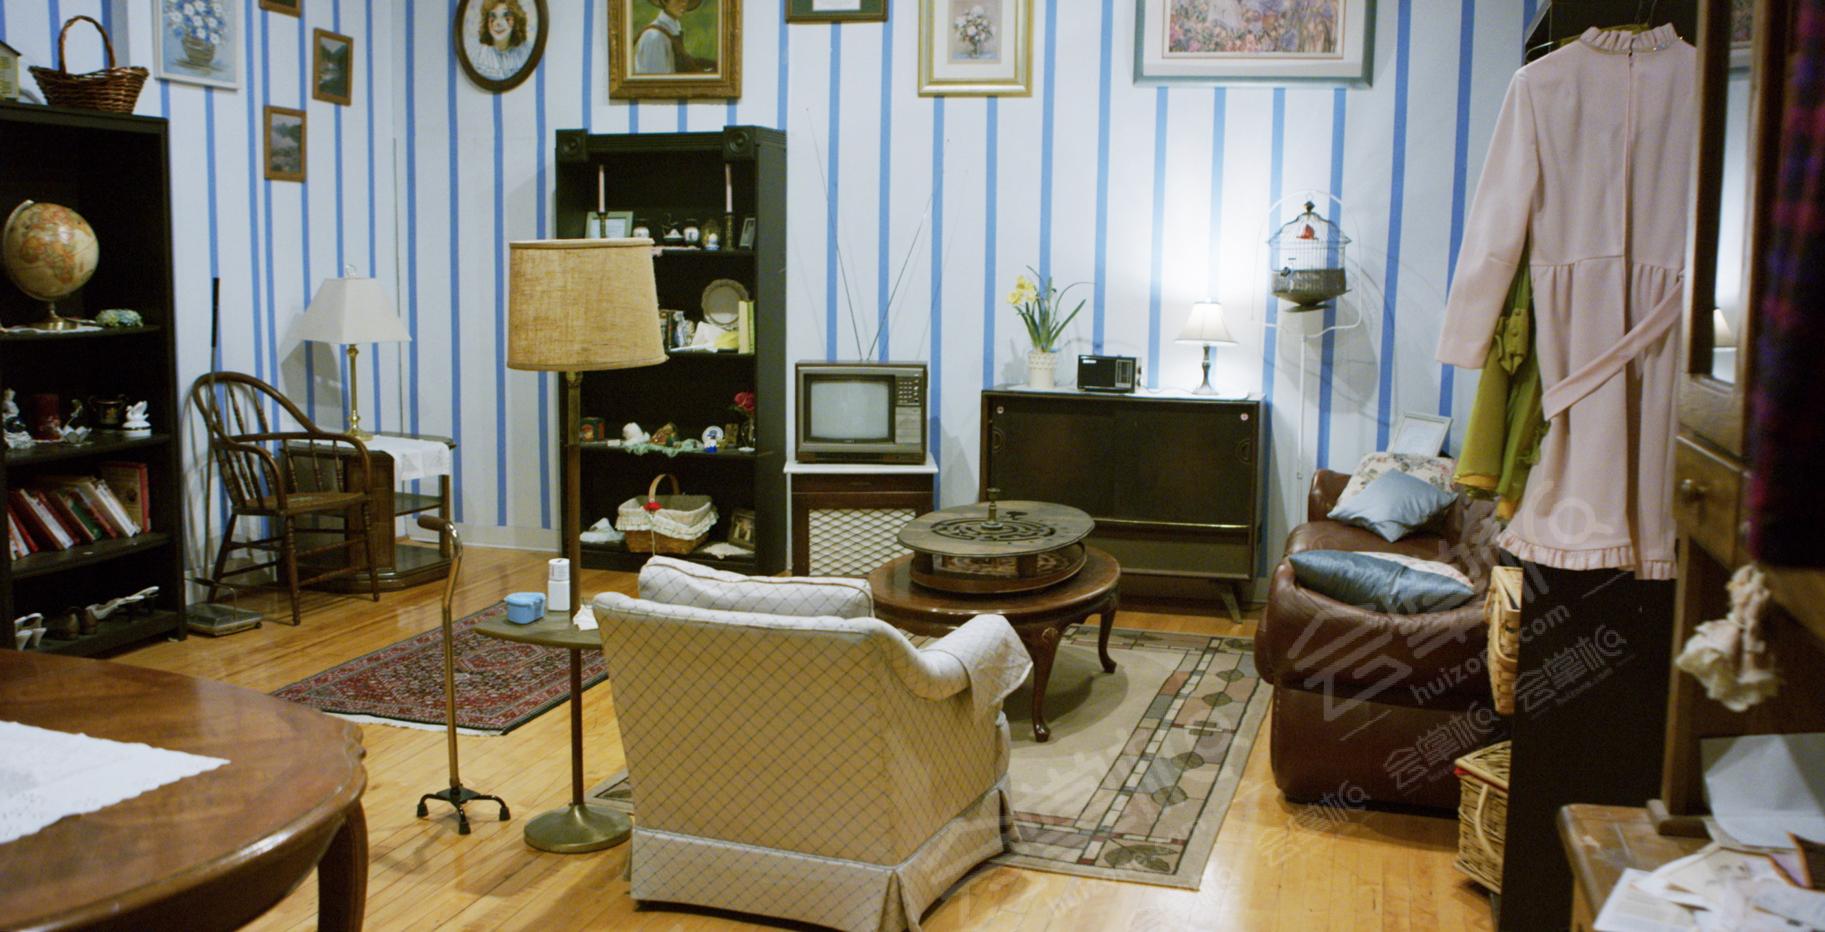 The Time Gallery: Five Multi-Themed Film Sets in Wicker Park